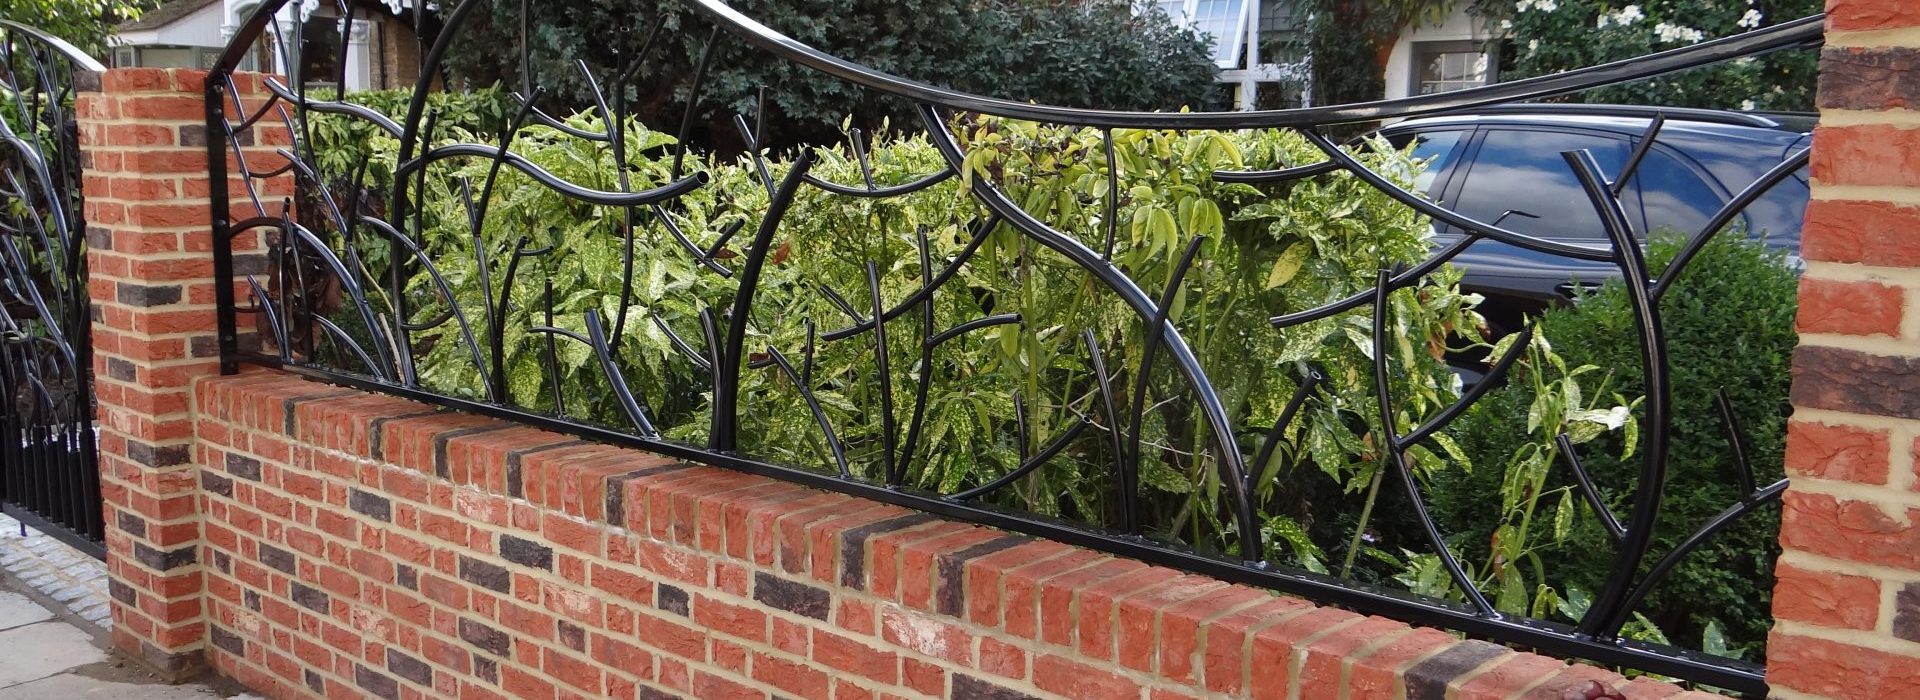 Bespoke wrought iron railings made and fitted by The Blacksmith Shop.